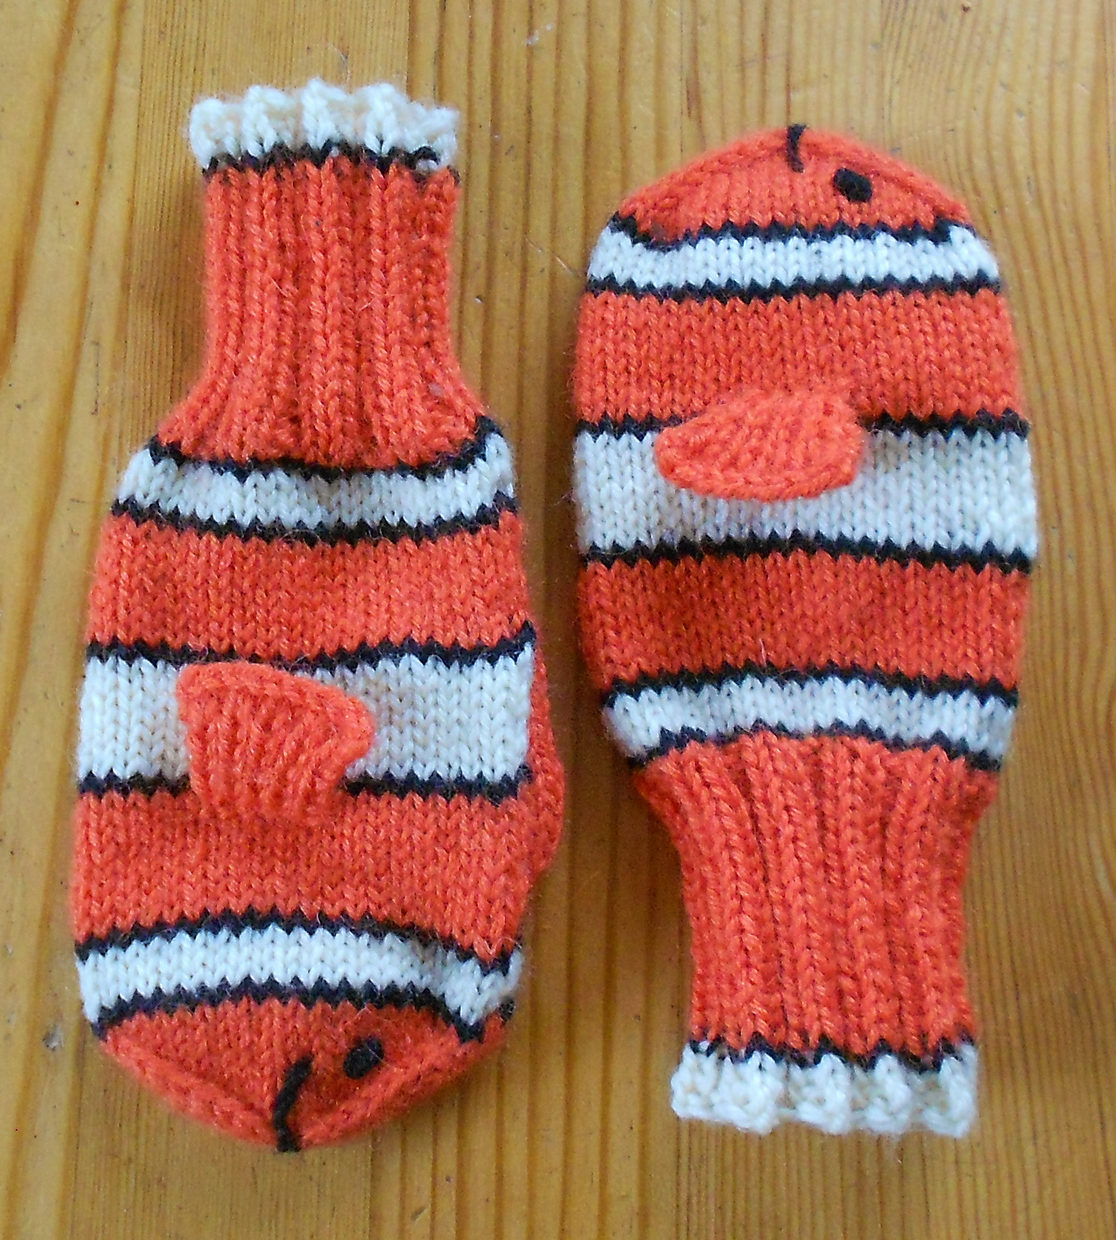 Fun Mitten and Glove Knitting Patterns | In the Loop Knitting